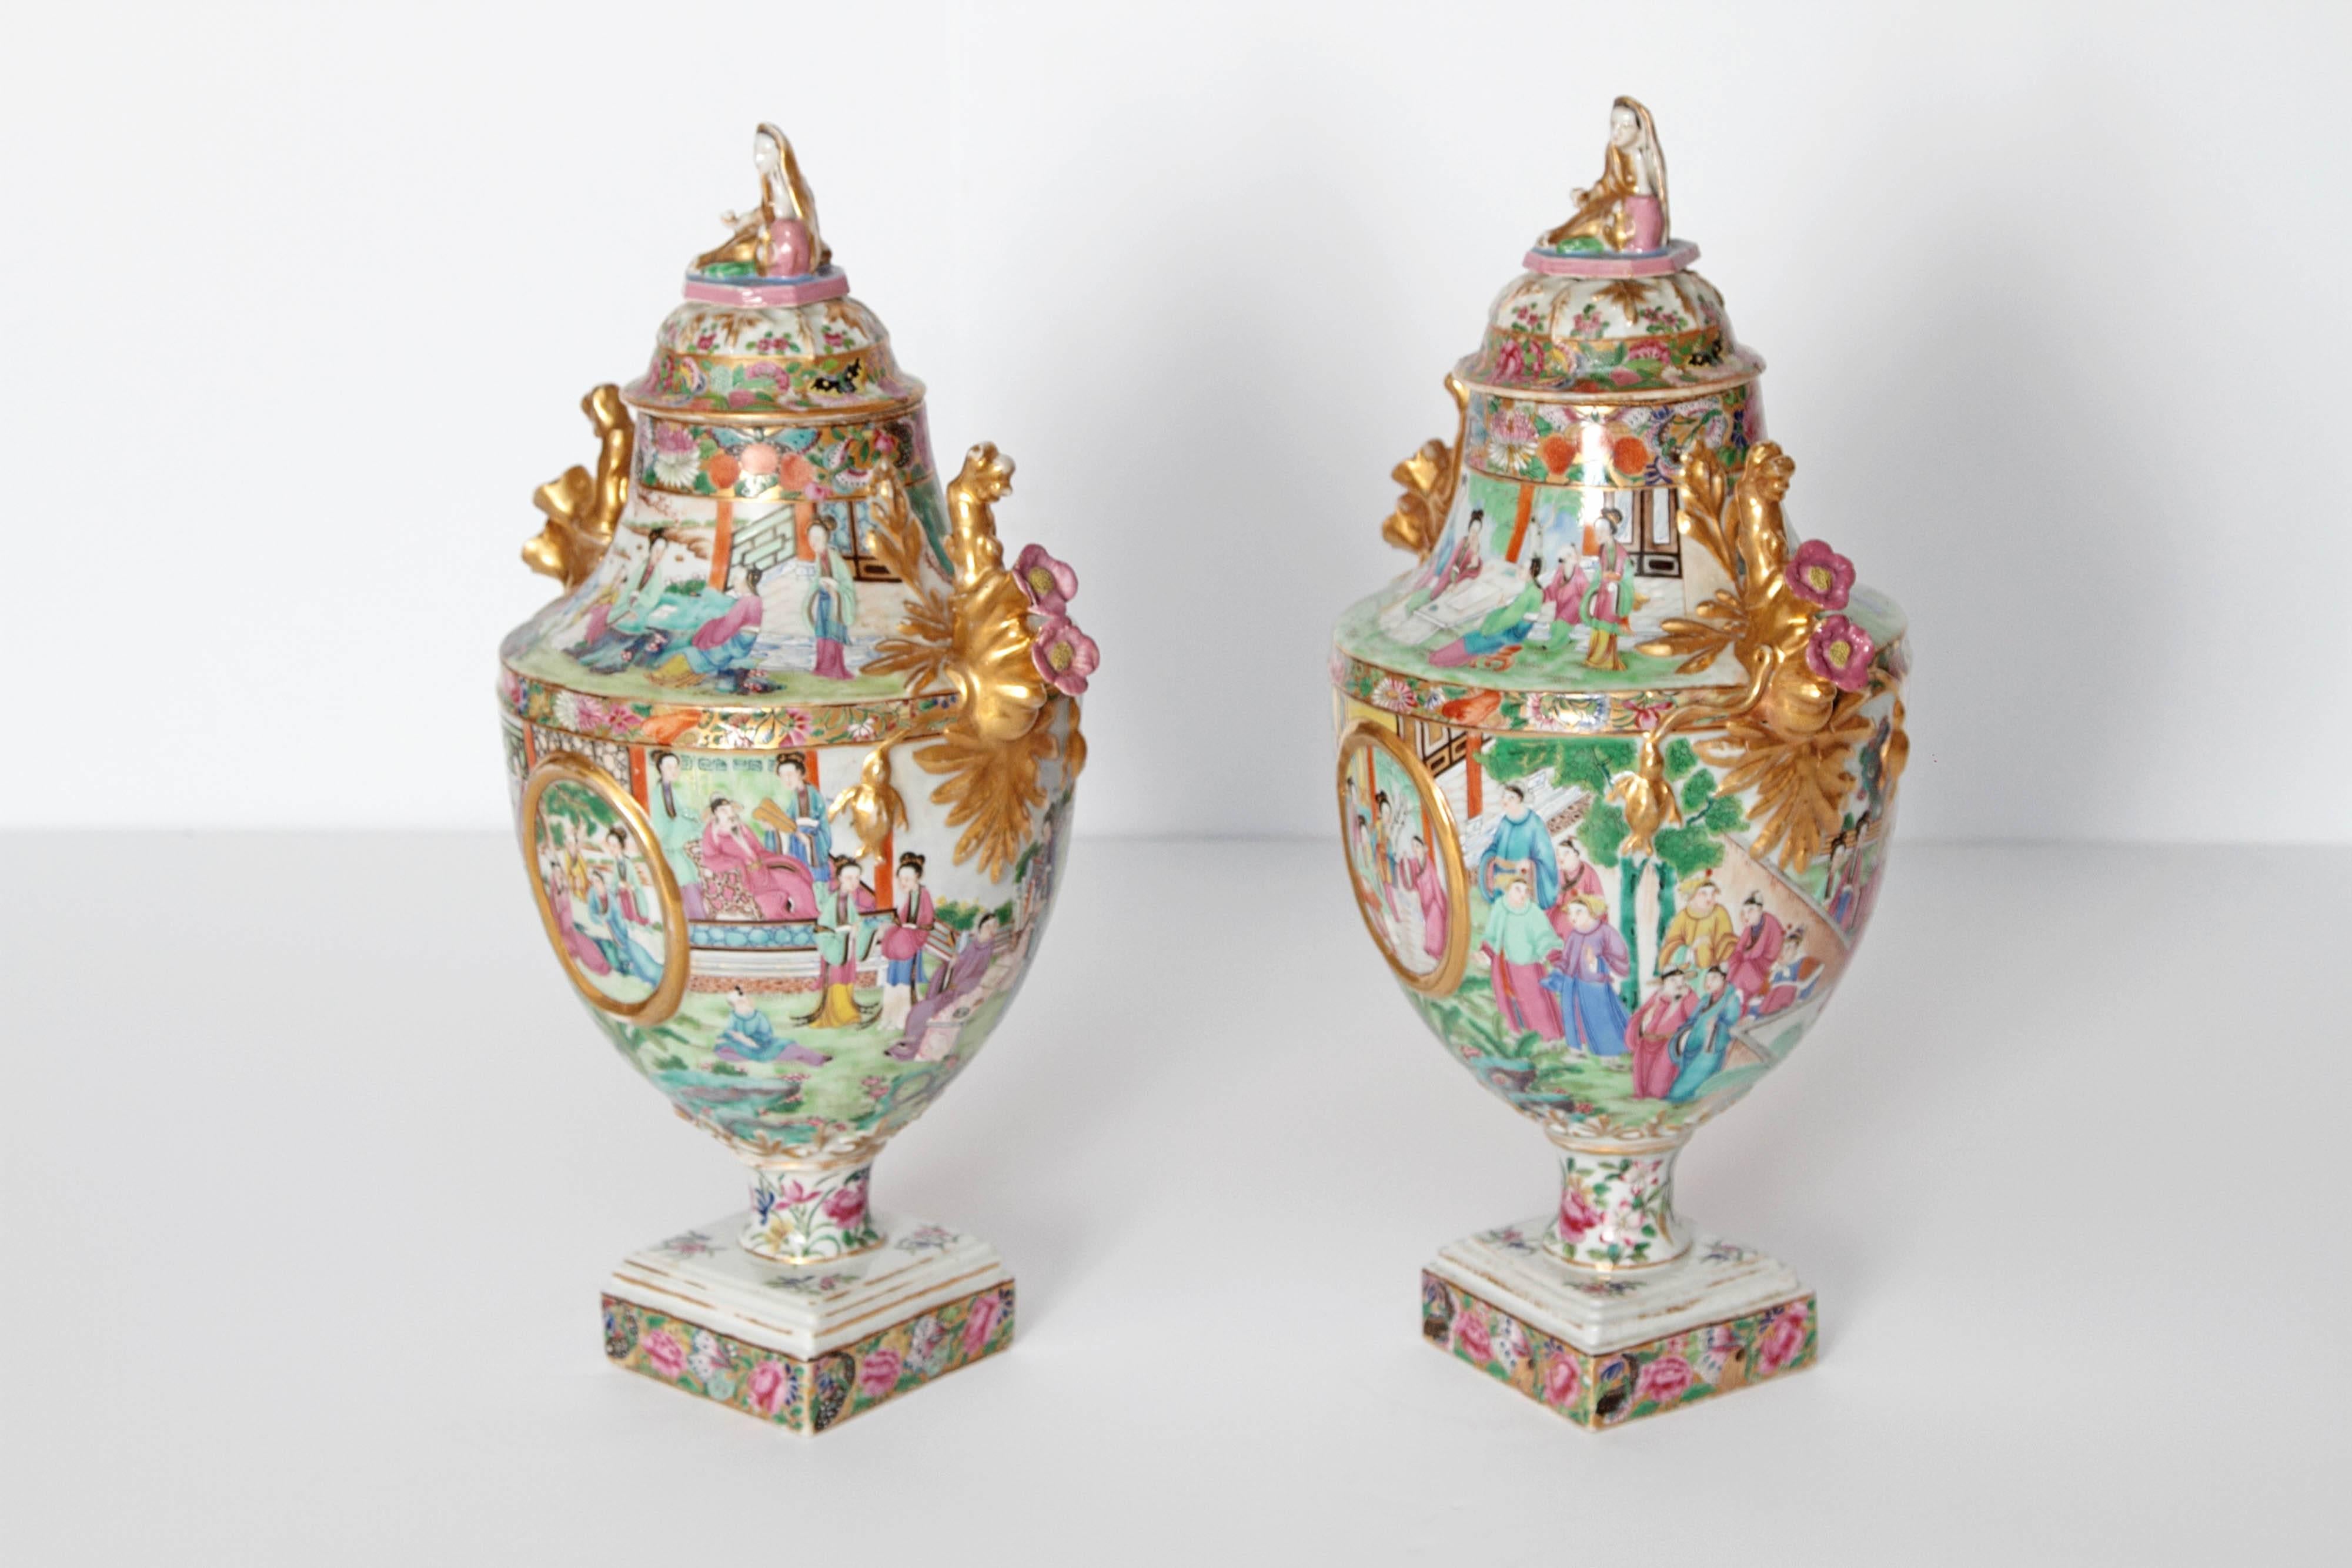 A pair of Chinese covered urns with famille rose coloration with all-over pattern of people and floral decoration, elaborate gold handles with pink and yellow flowers, additional gold / gilt ovals / medallions on both fronts and backs, lids are